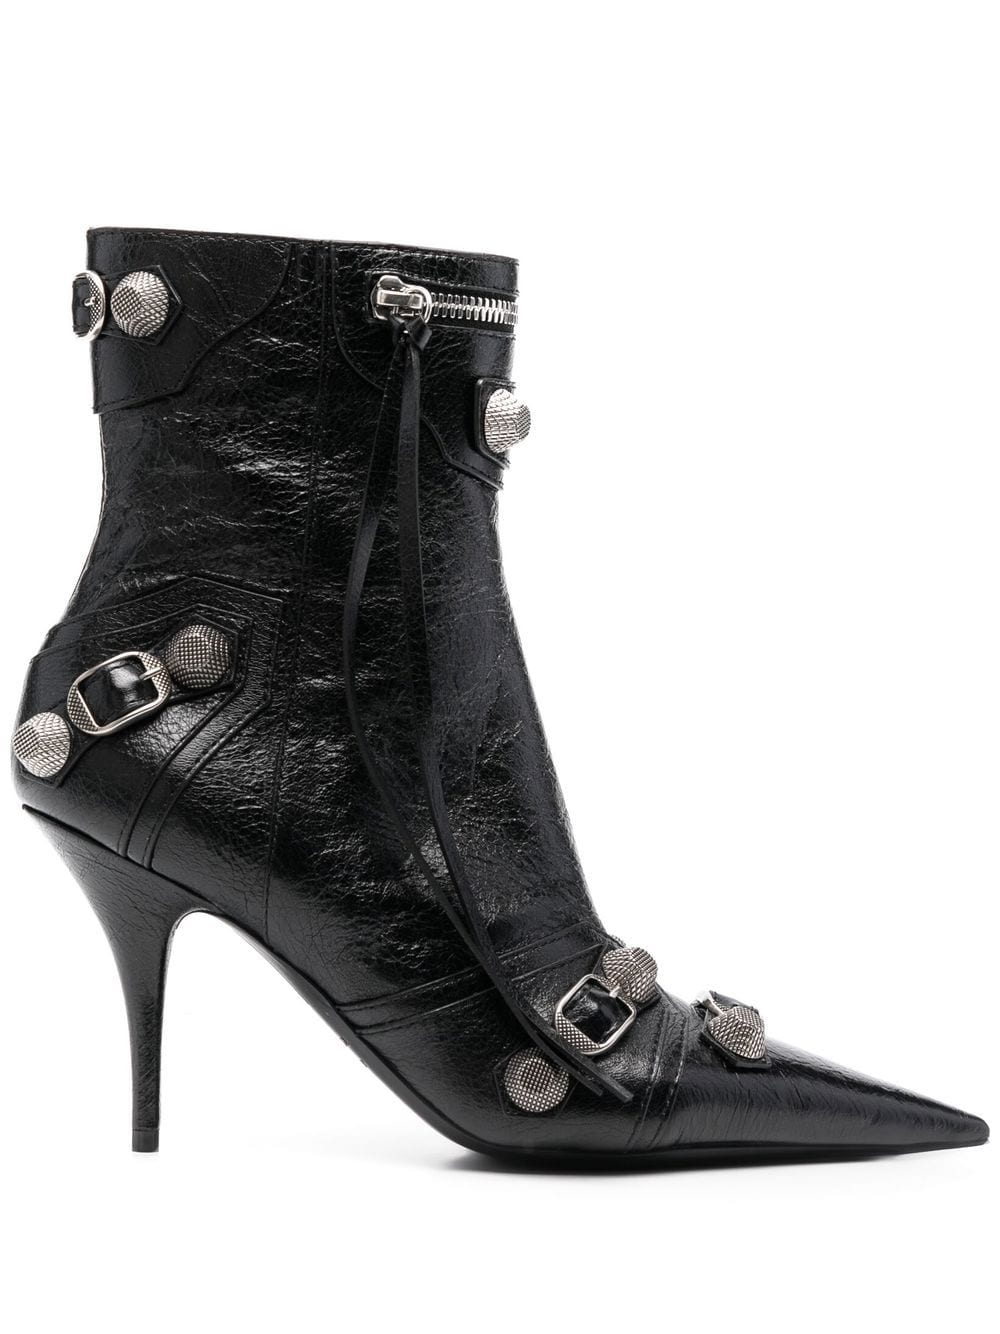 Cagole leather ankle boots<BR/><BR/><BR/>